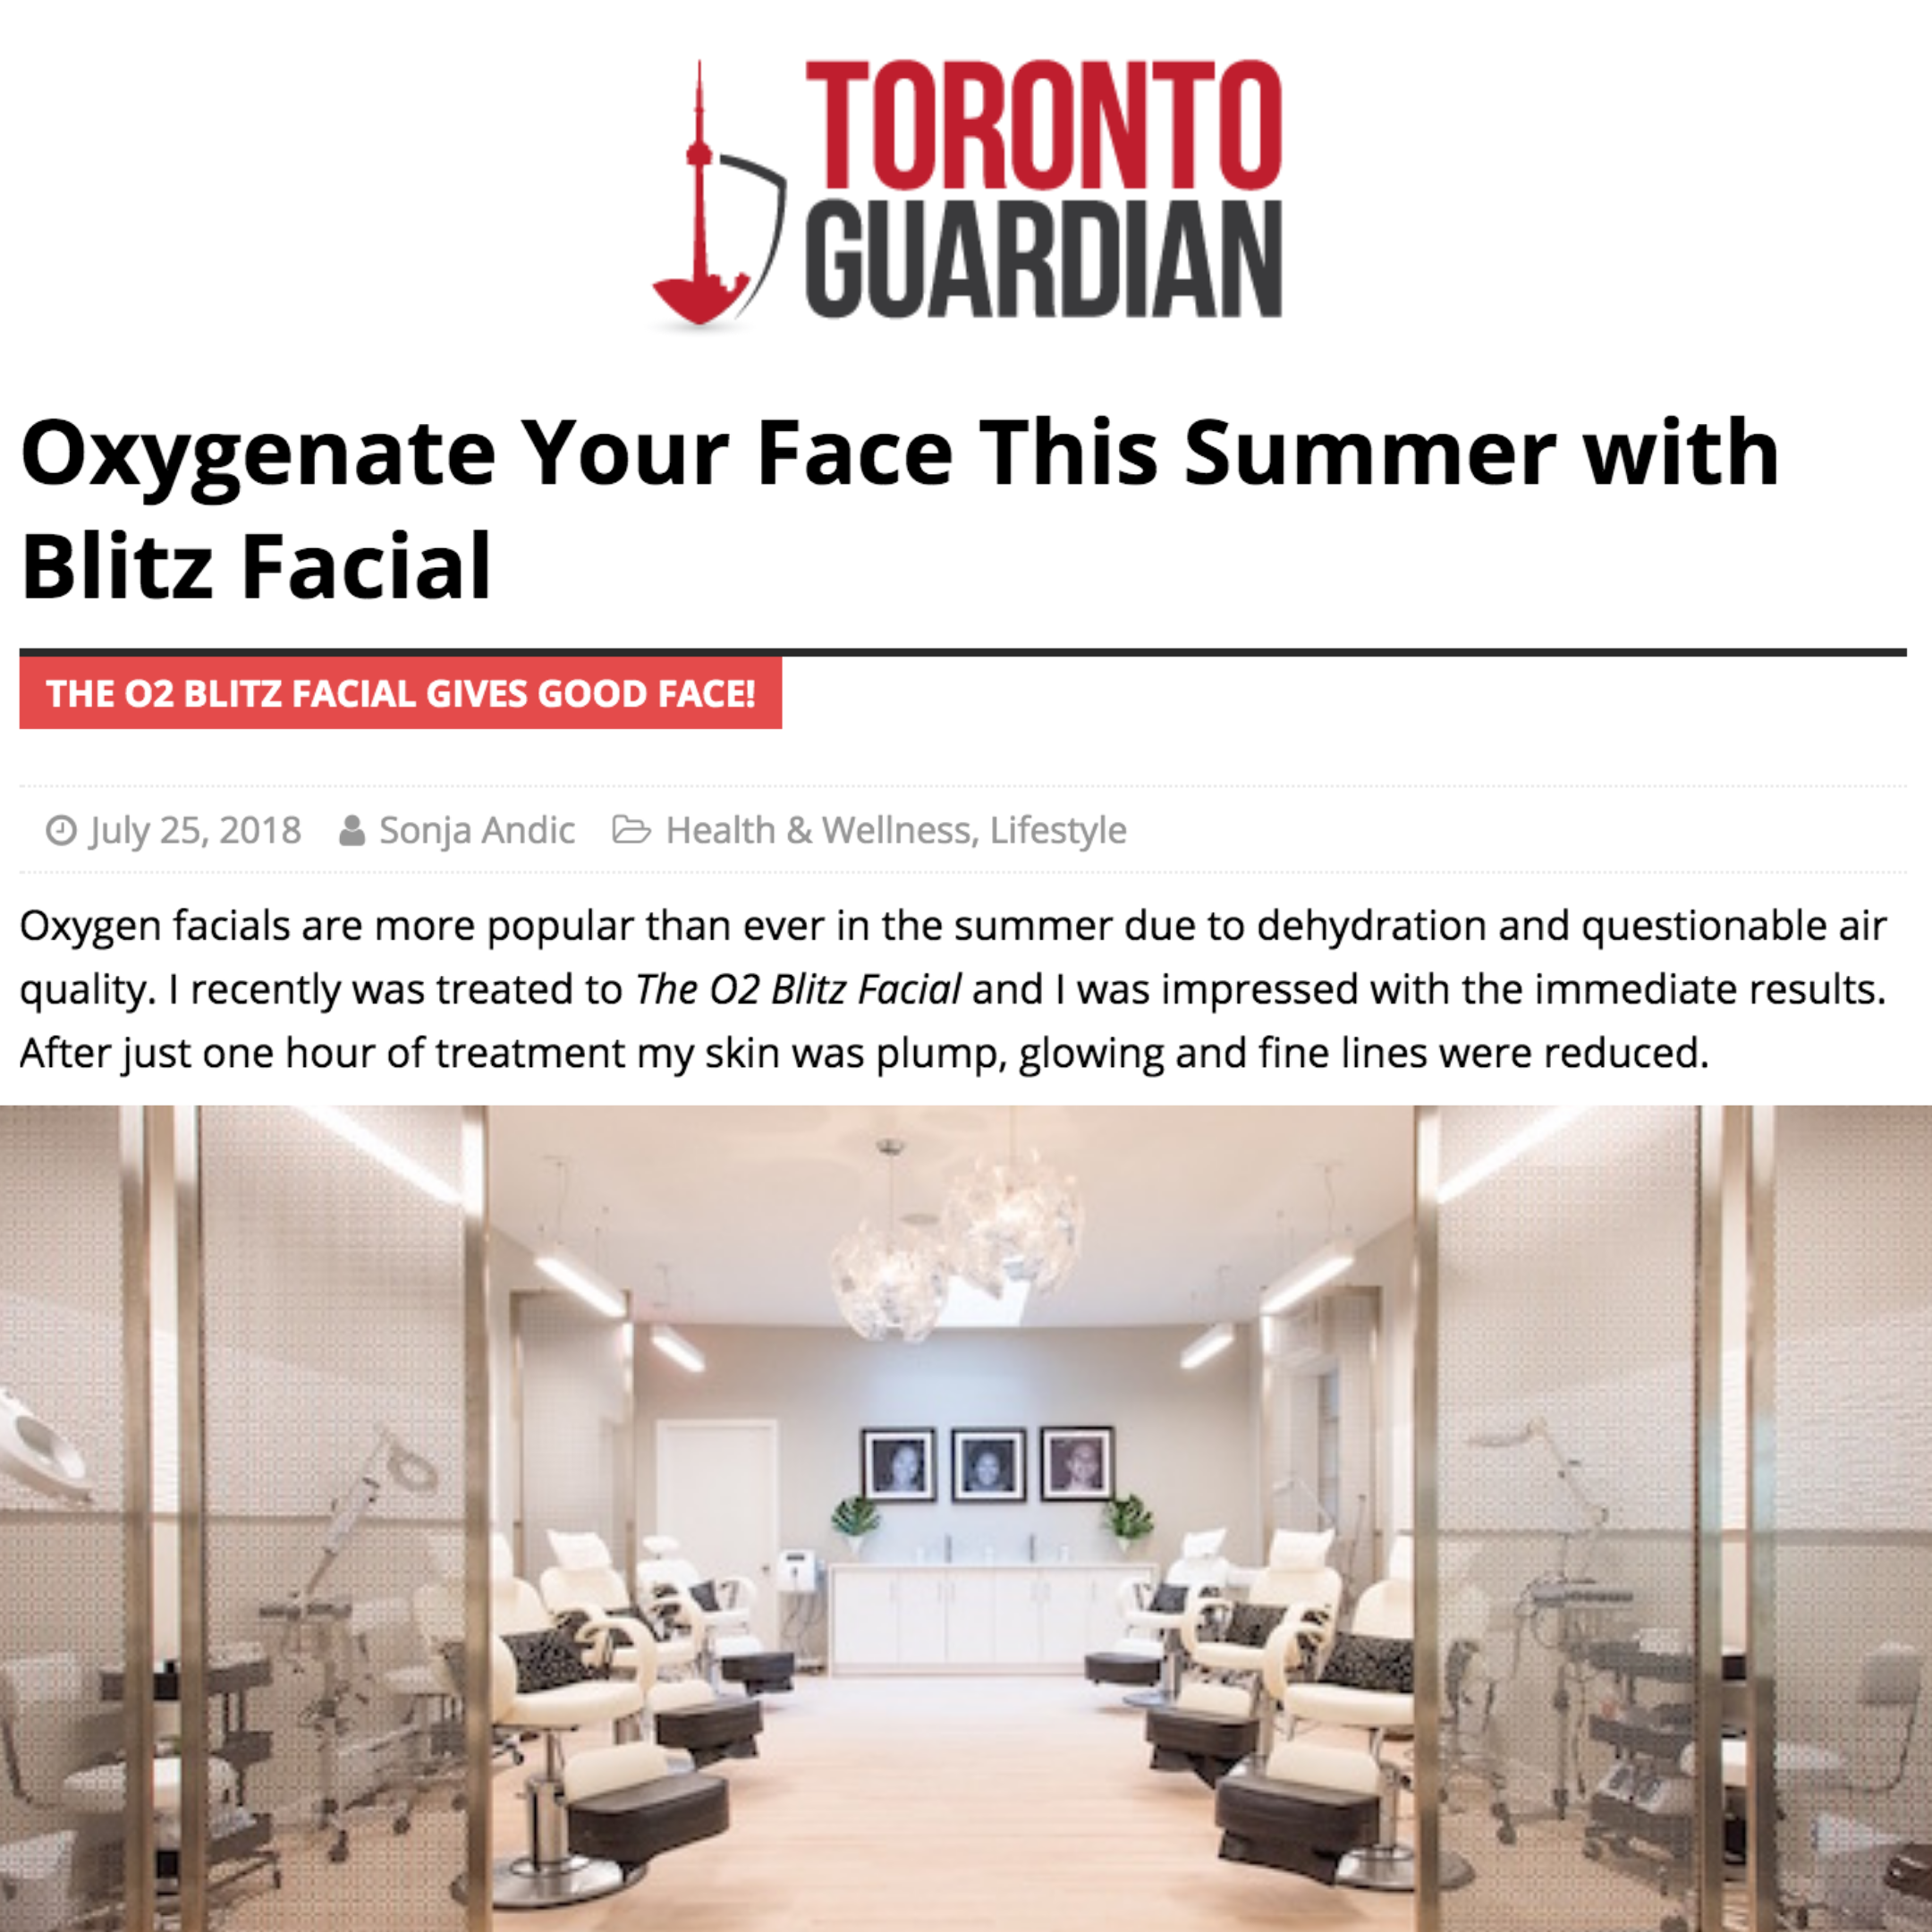 As mentioned in Toronto Guardian, "I recently was treated to The O2 Blitz Facial and I was impressed with the immediate results. After just one hour of treatment my skin was plump, glowing and fine lines were reduced."